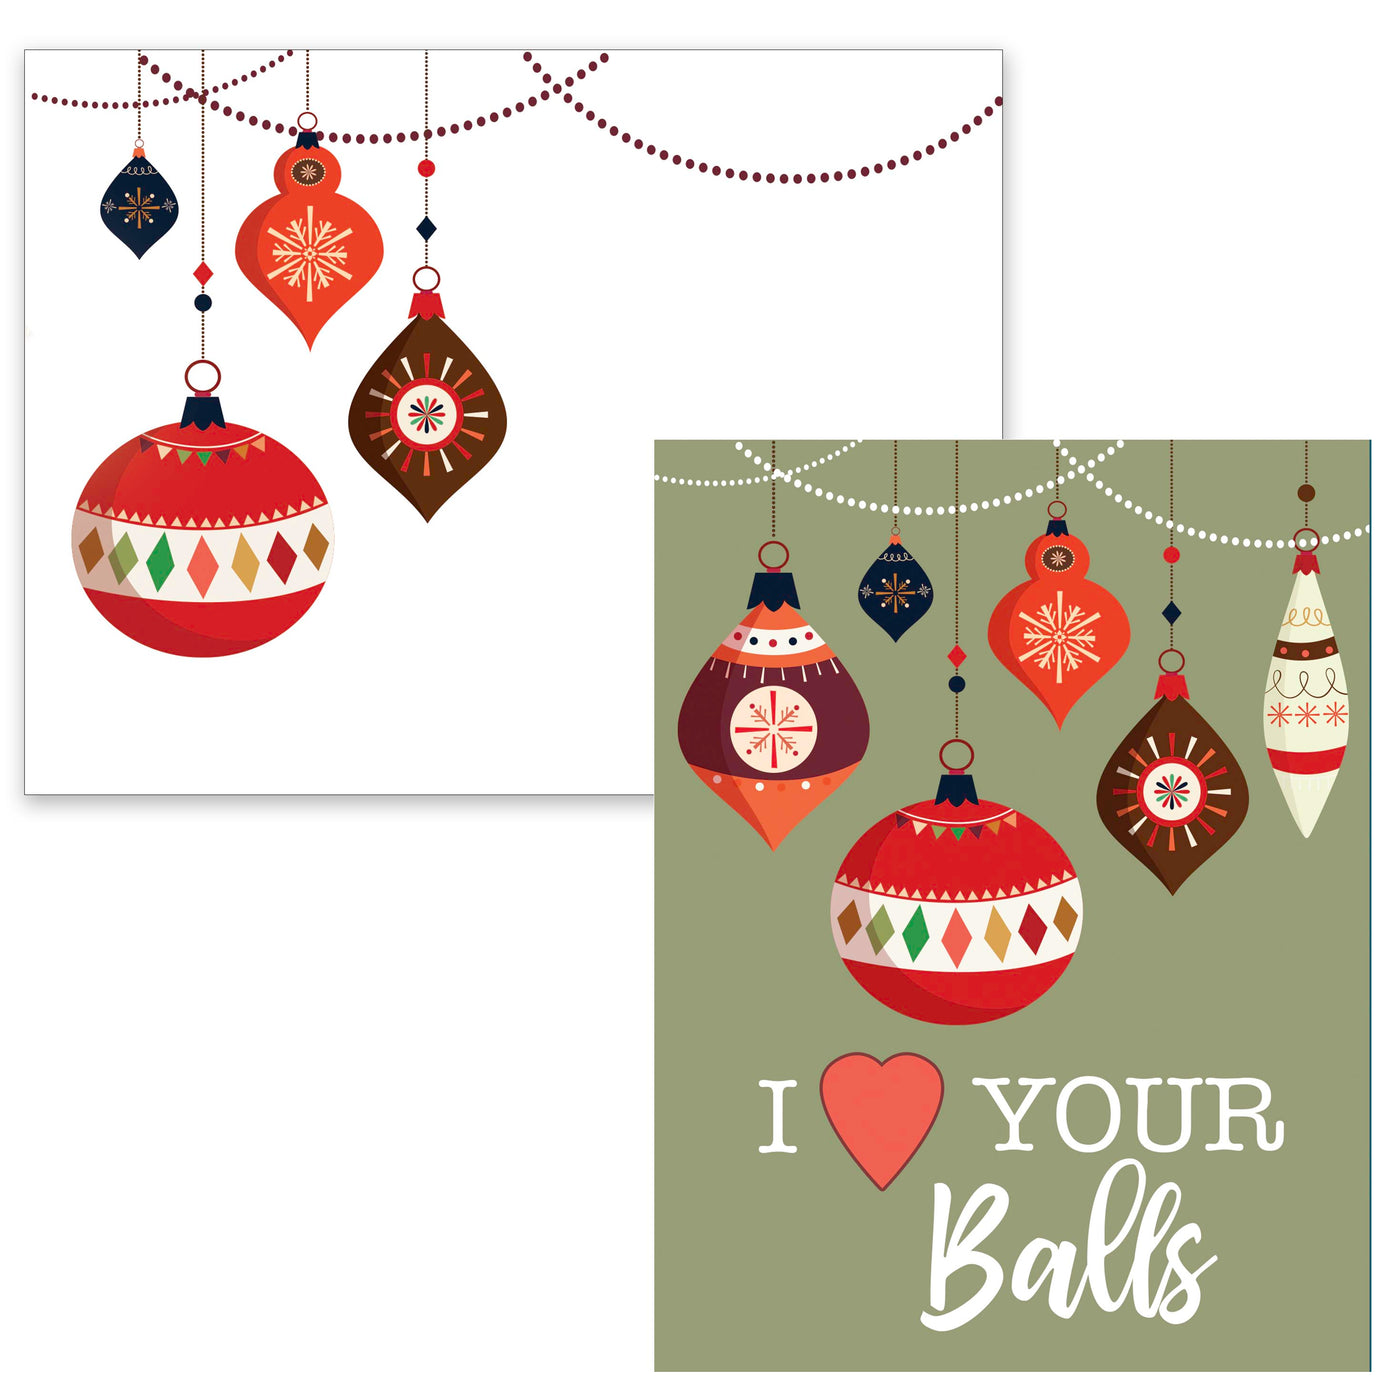 Nostalgic retro ornaments combine with funny "I Heart Your Balls" text to make someone blush this holiday season. Blank Inside.  A2 (4.25 x 5.5) Set of 8 folded Cards Coordinating Custom Printed Envelopes included Made in the USA